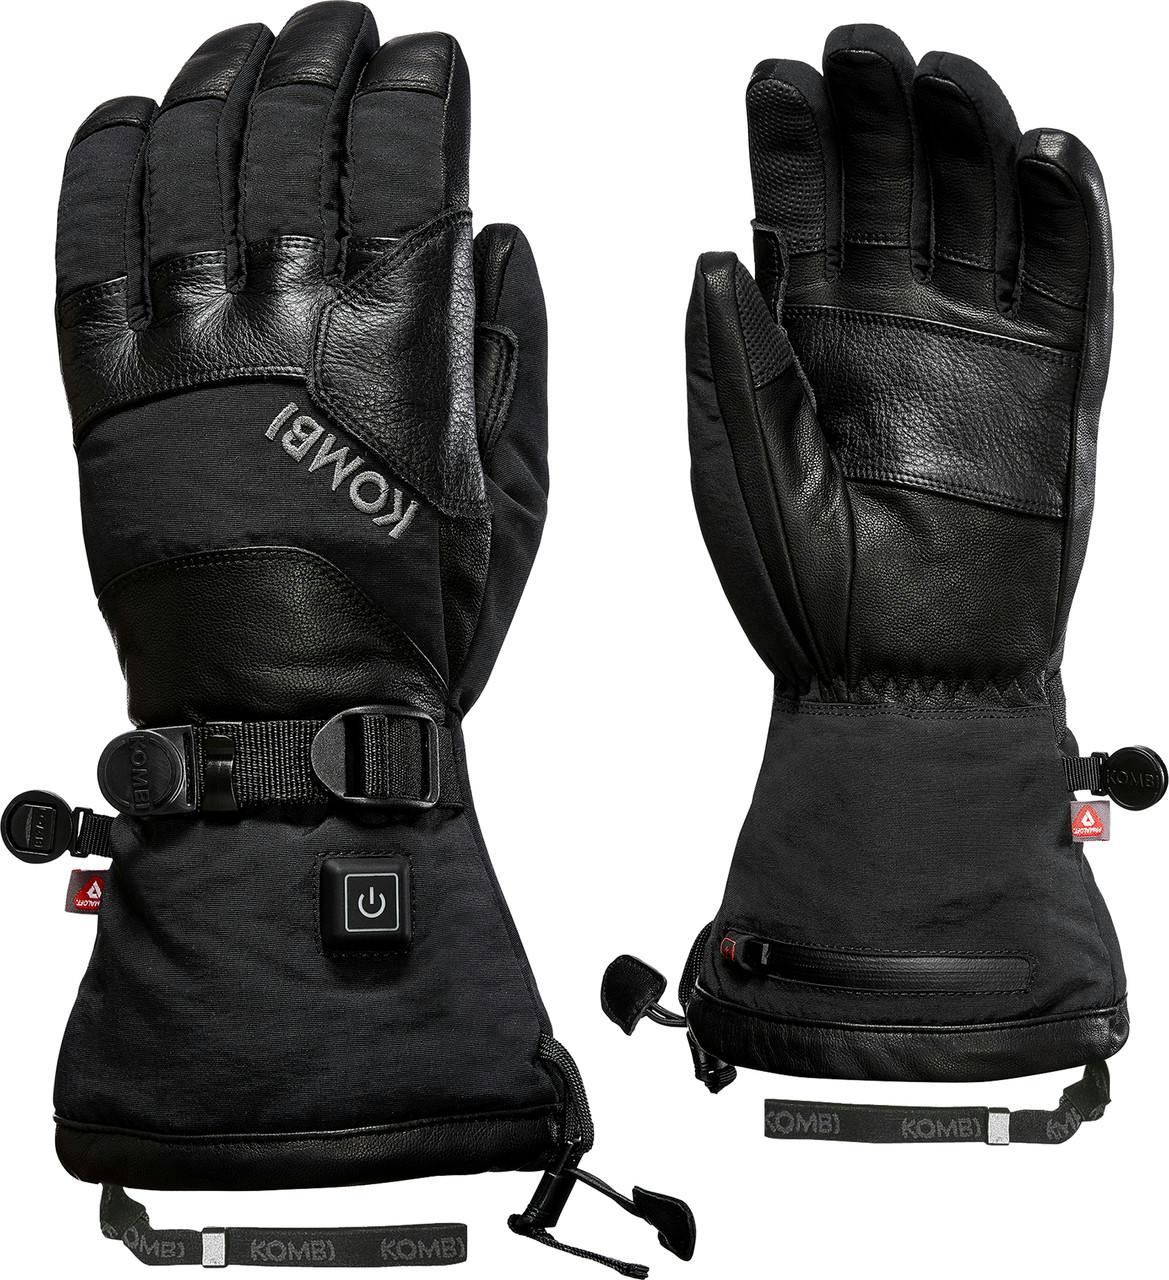 The Warm-Up Heated Gloves Black